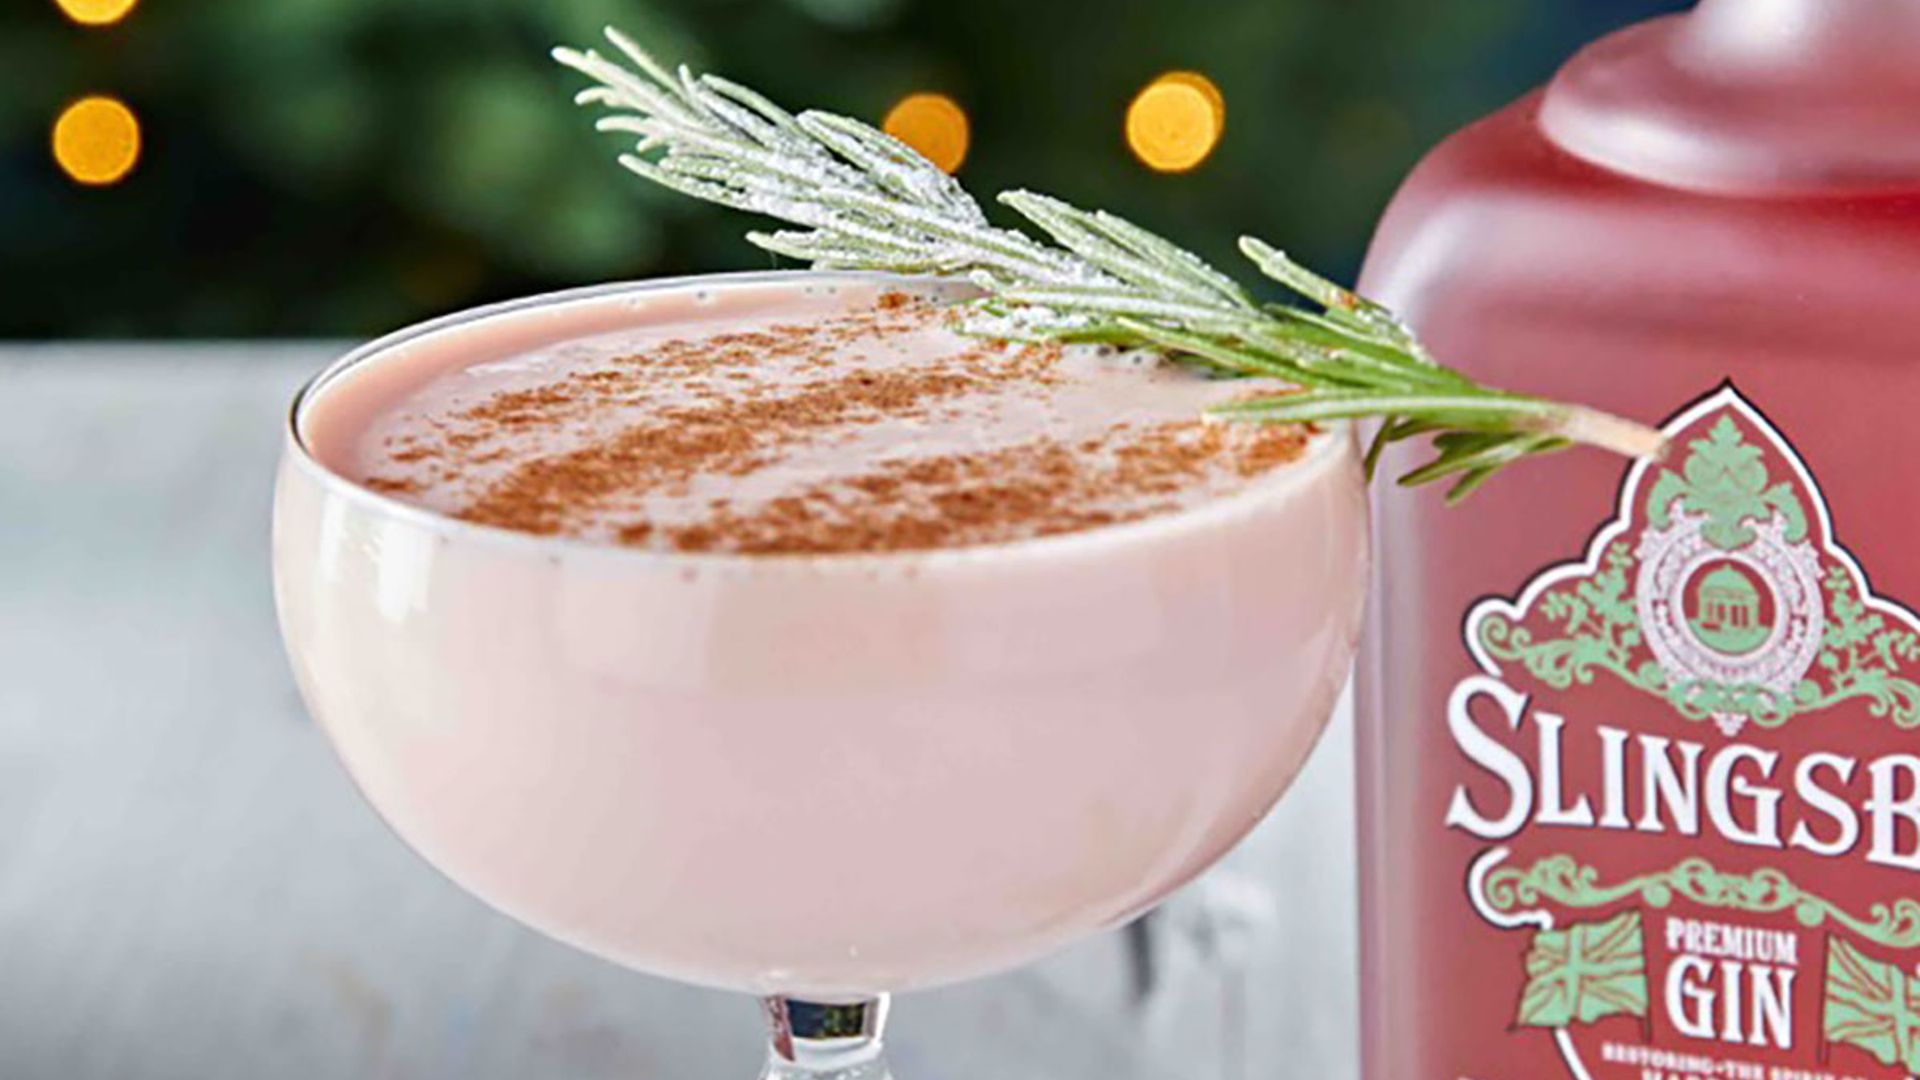 This spiced rhubarb and cream cocktail is set to be a huge Christmas hit!